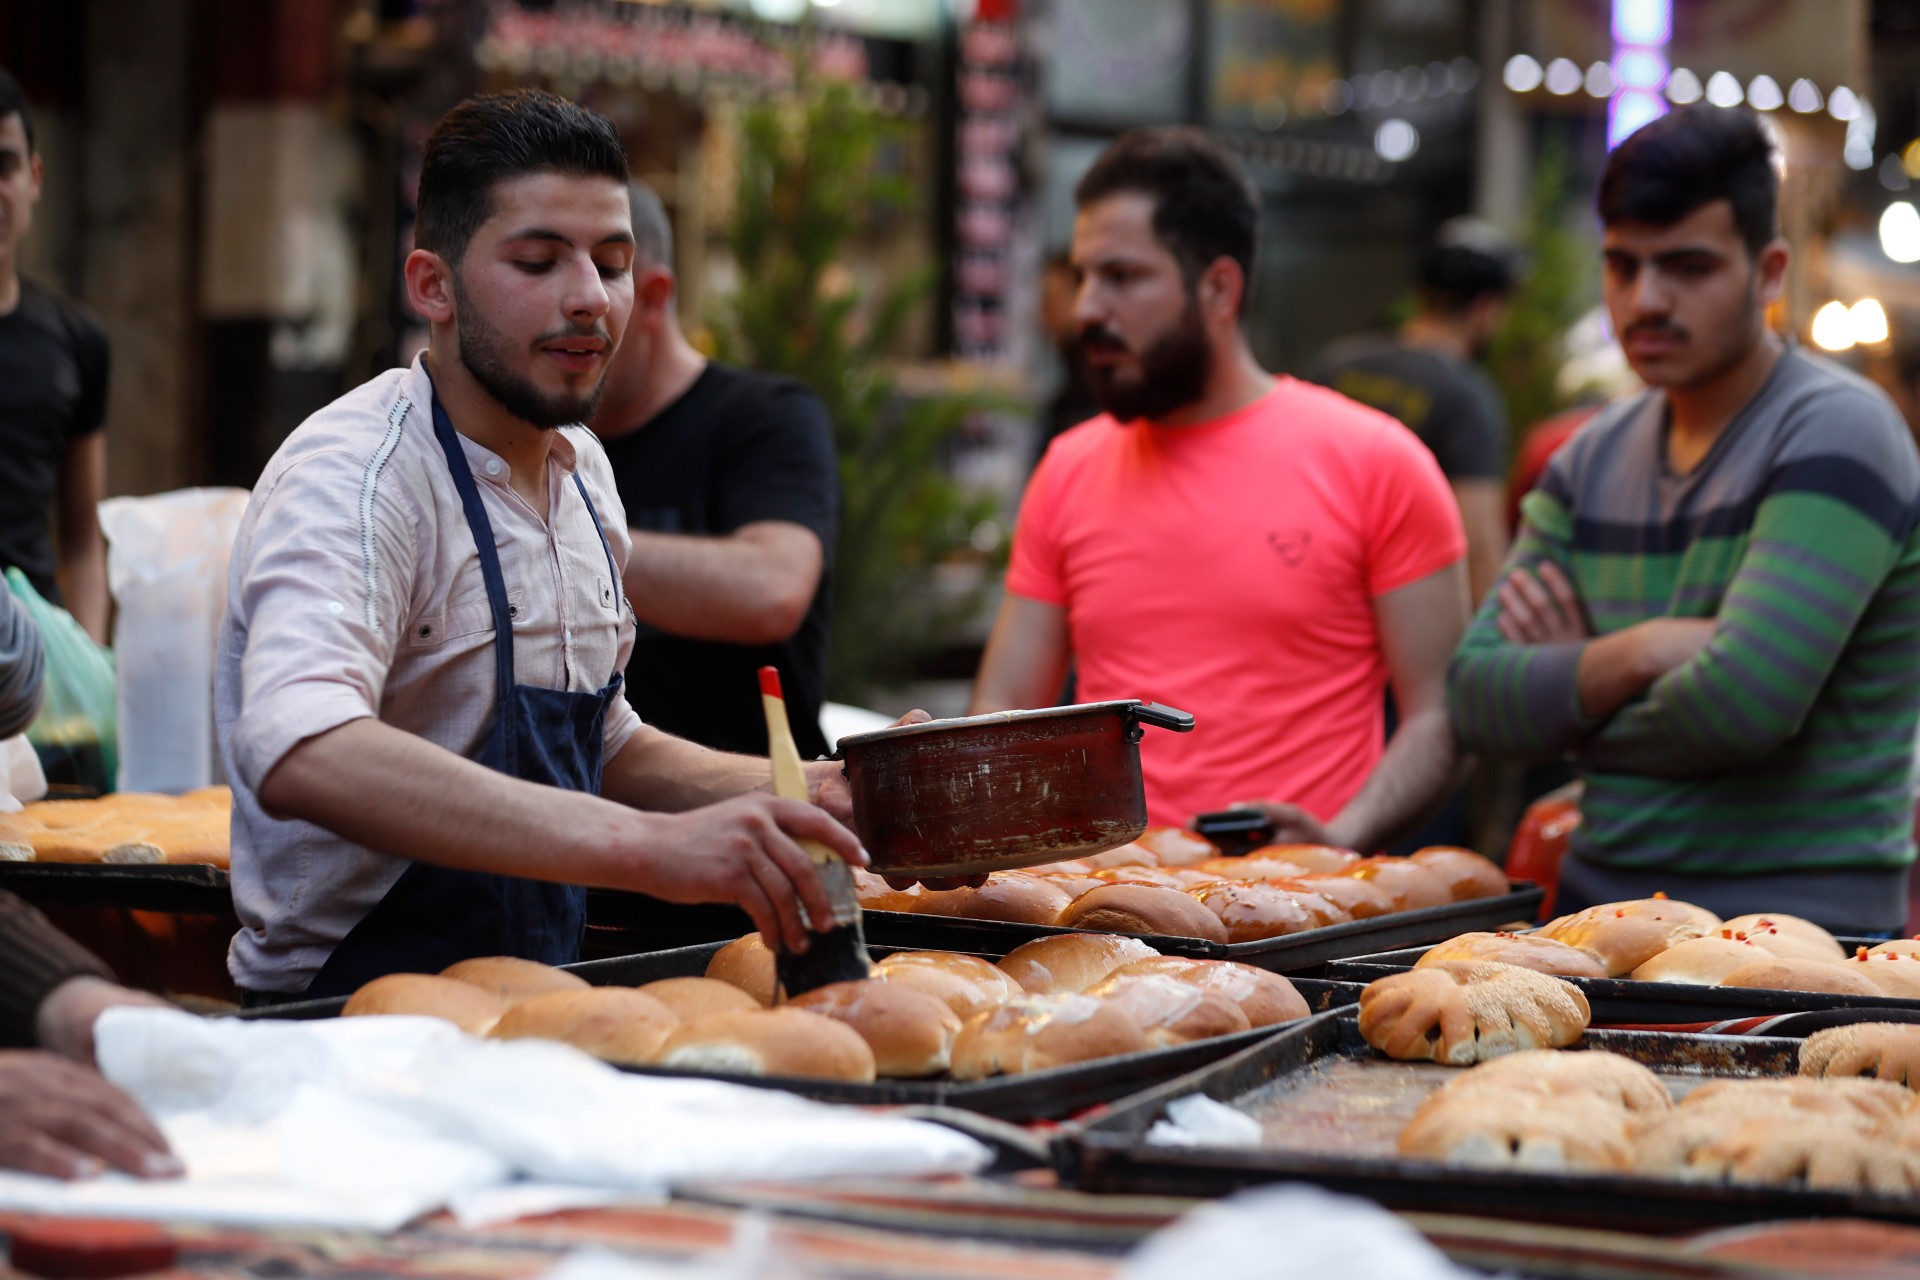 Prices of food have skyrocketed in Syria (MEE)